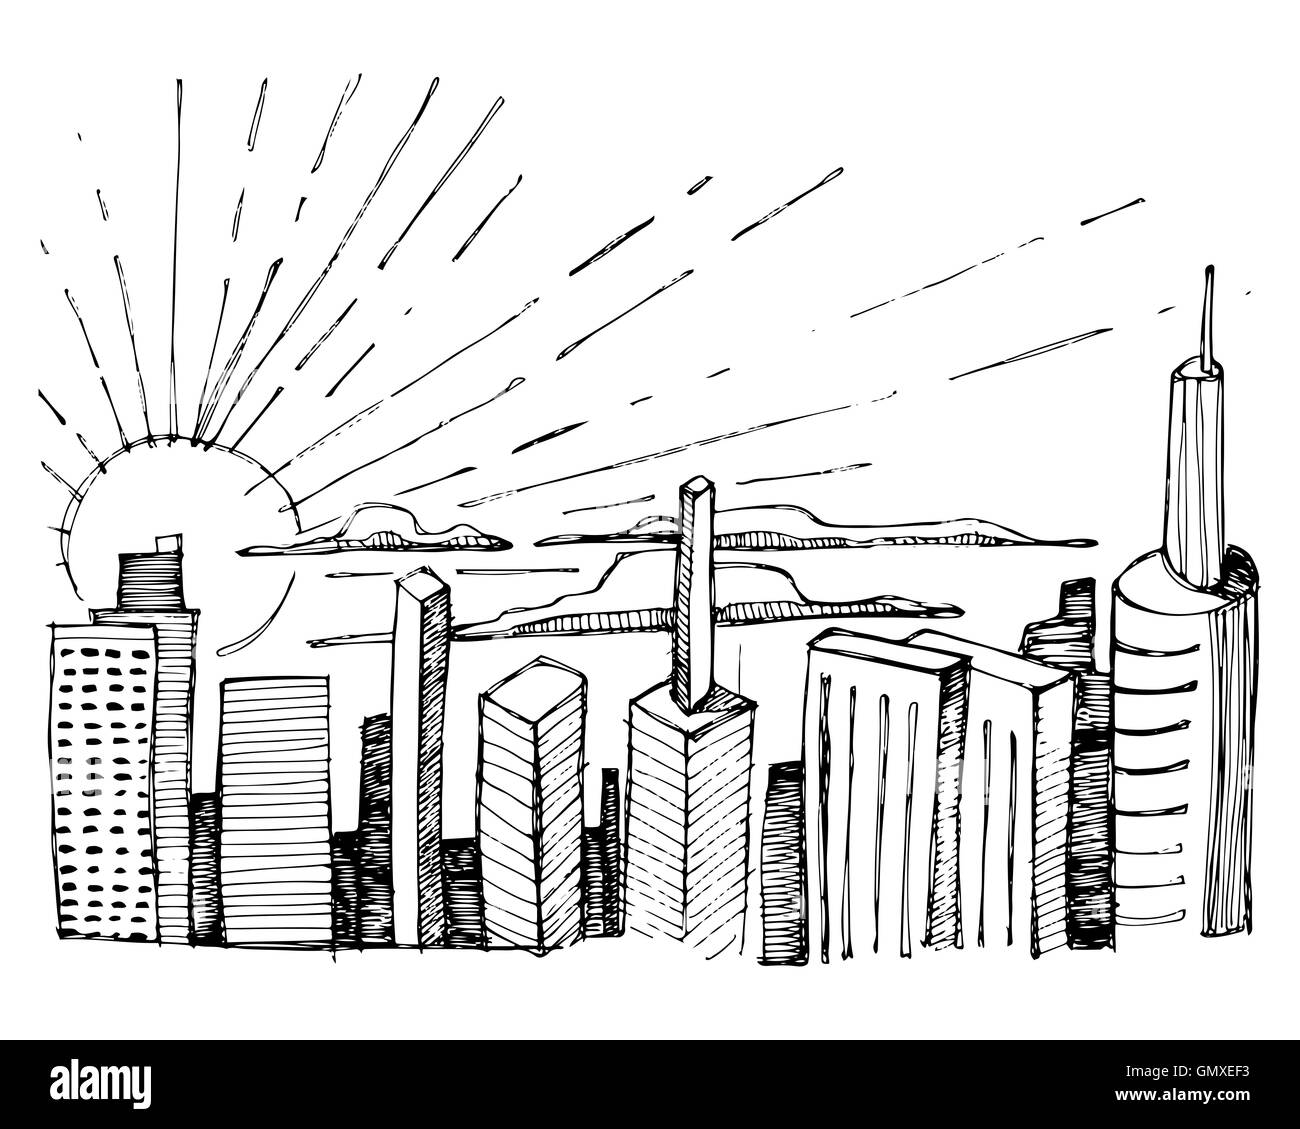 Hand drawn illustration or drawing of an urban skyline Stock Photo